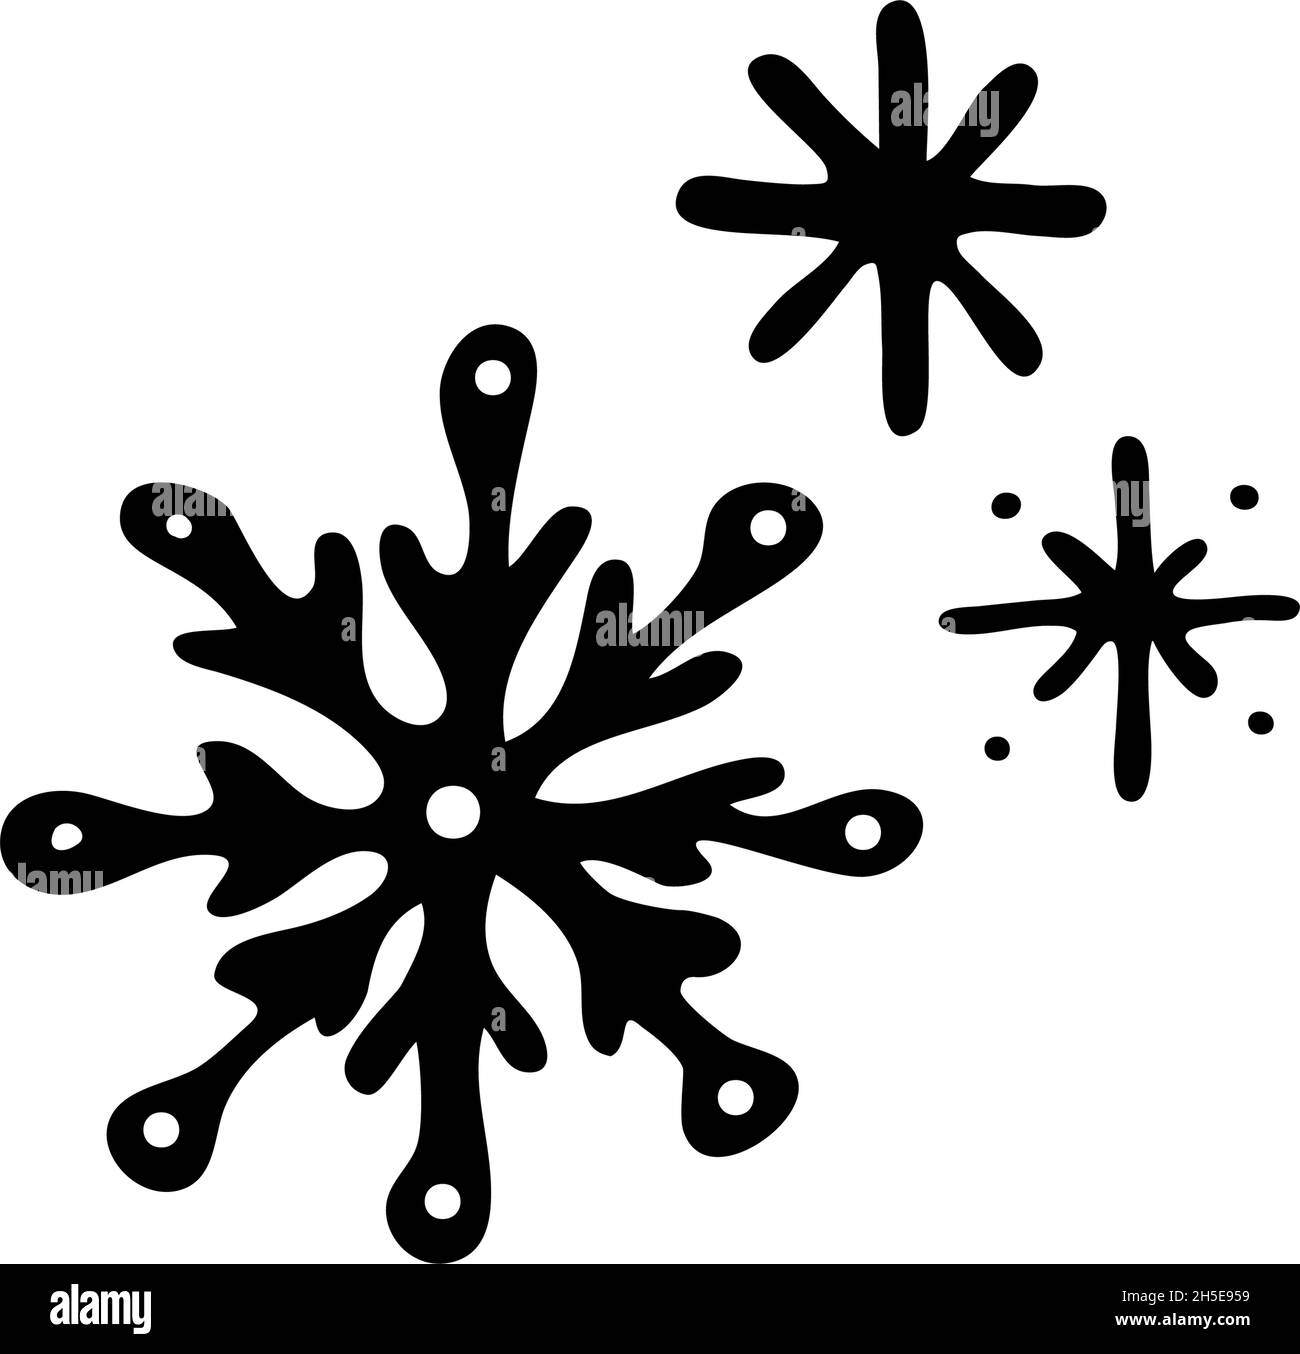 Free Snowflake Clipart - Public Domain Snowflake clip art, images and  graphics